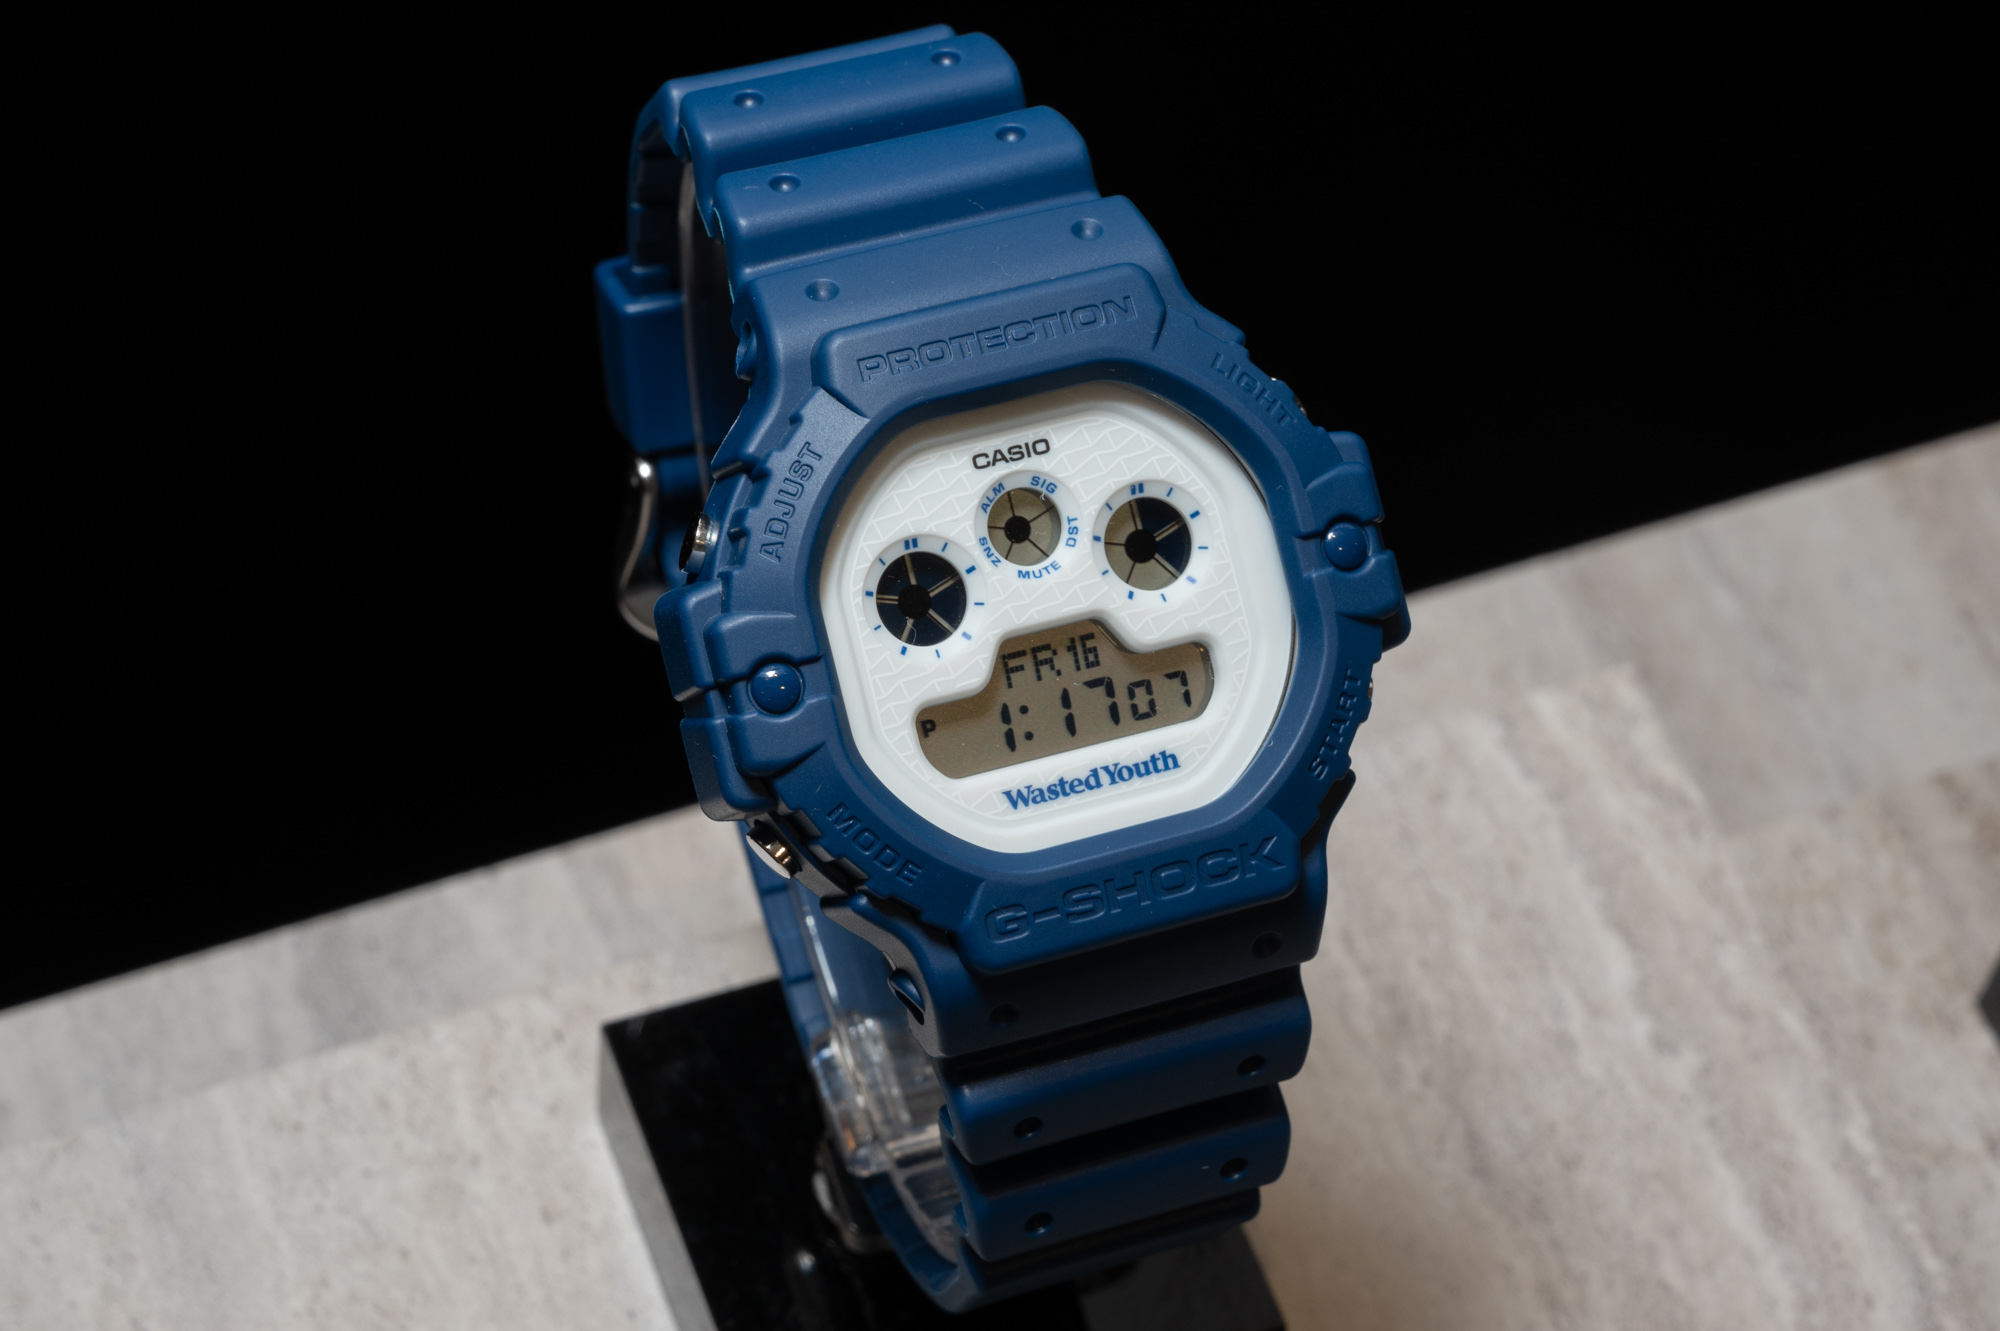 Wasted Youth x G-SHOCK コラボレーションモデル